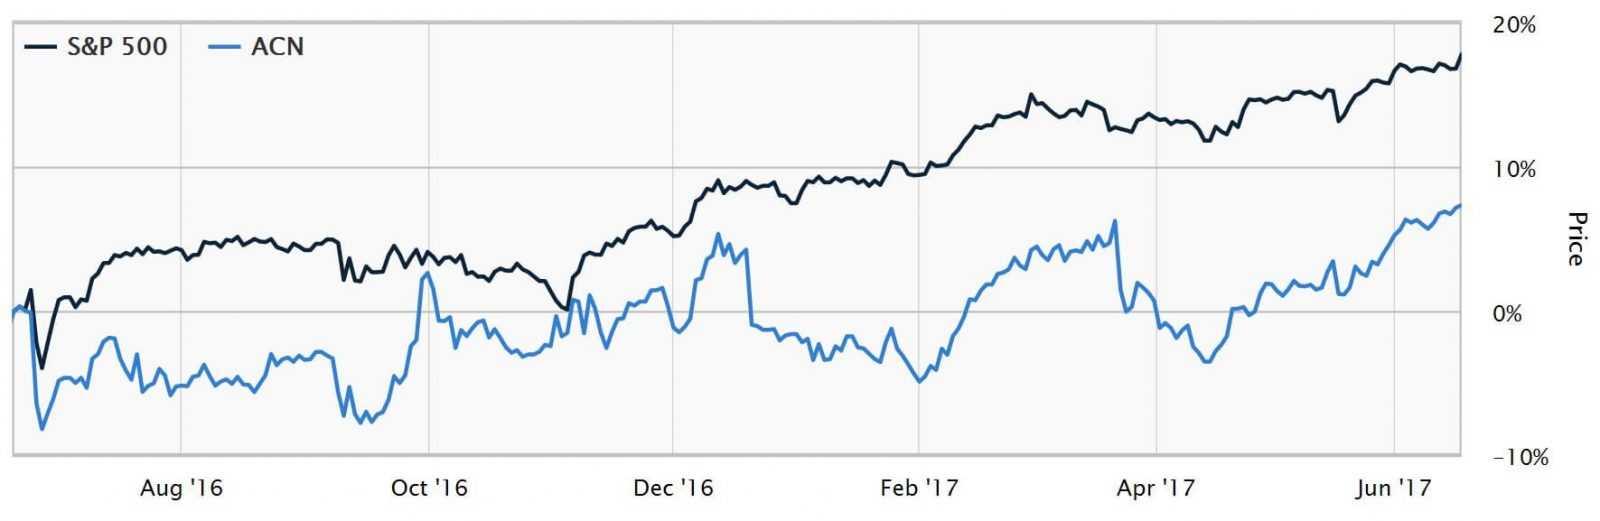 ACN stock underperformed the S&P 500 in the last 12 months